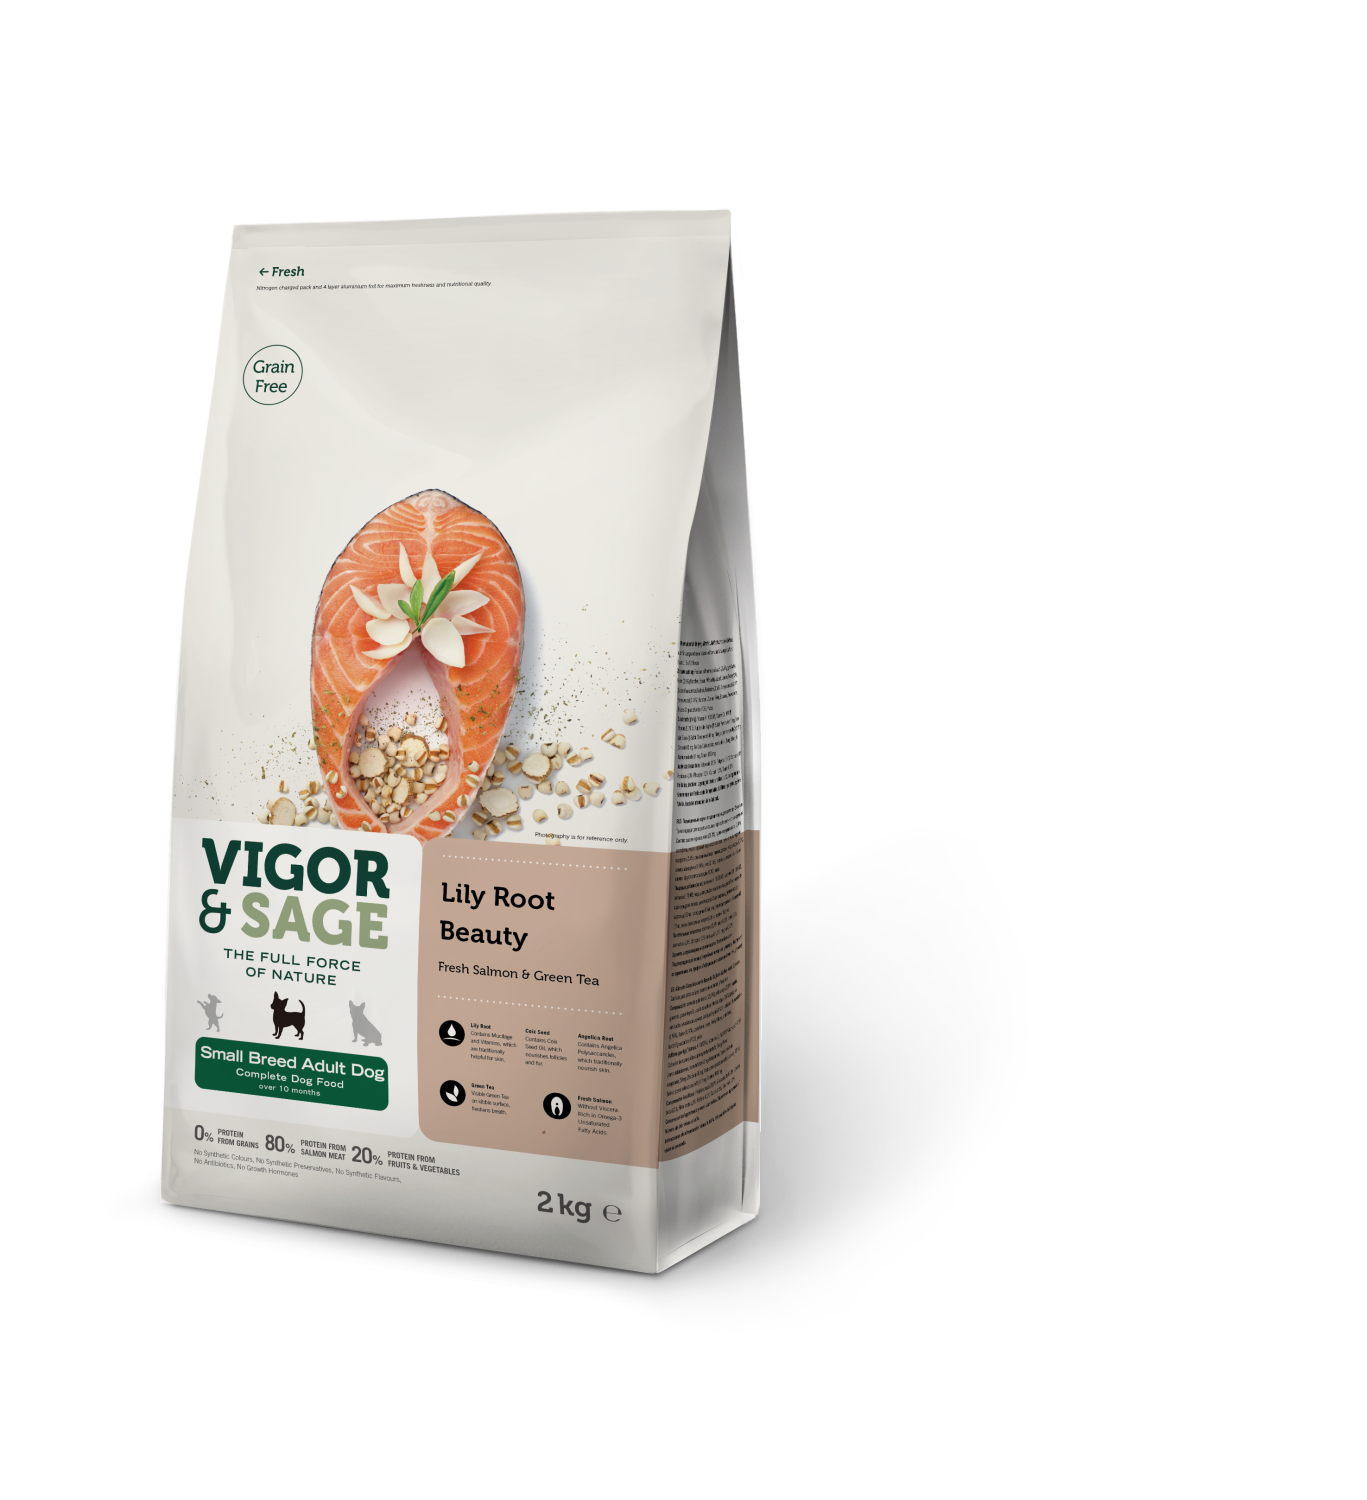 Vigor & sage Lily root small adult 2kg